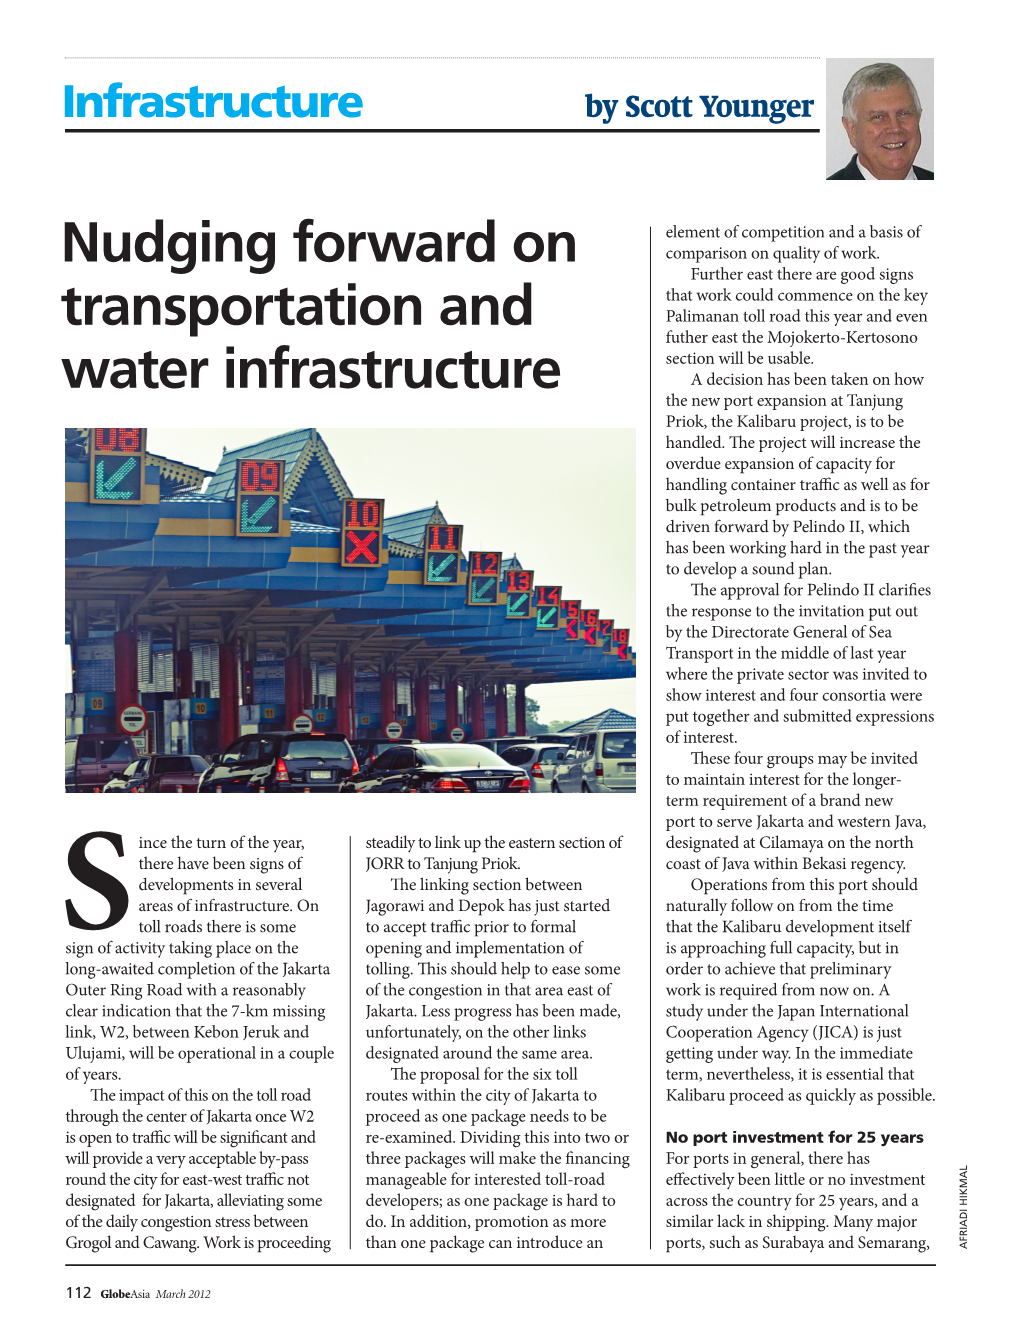 Nudging Forward on Transportation and Water Infrastructure